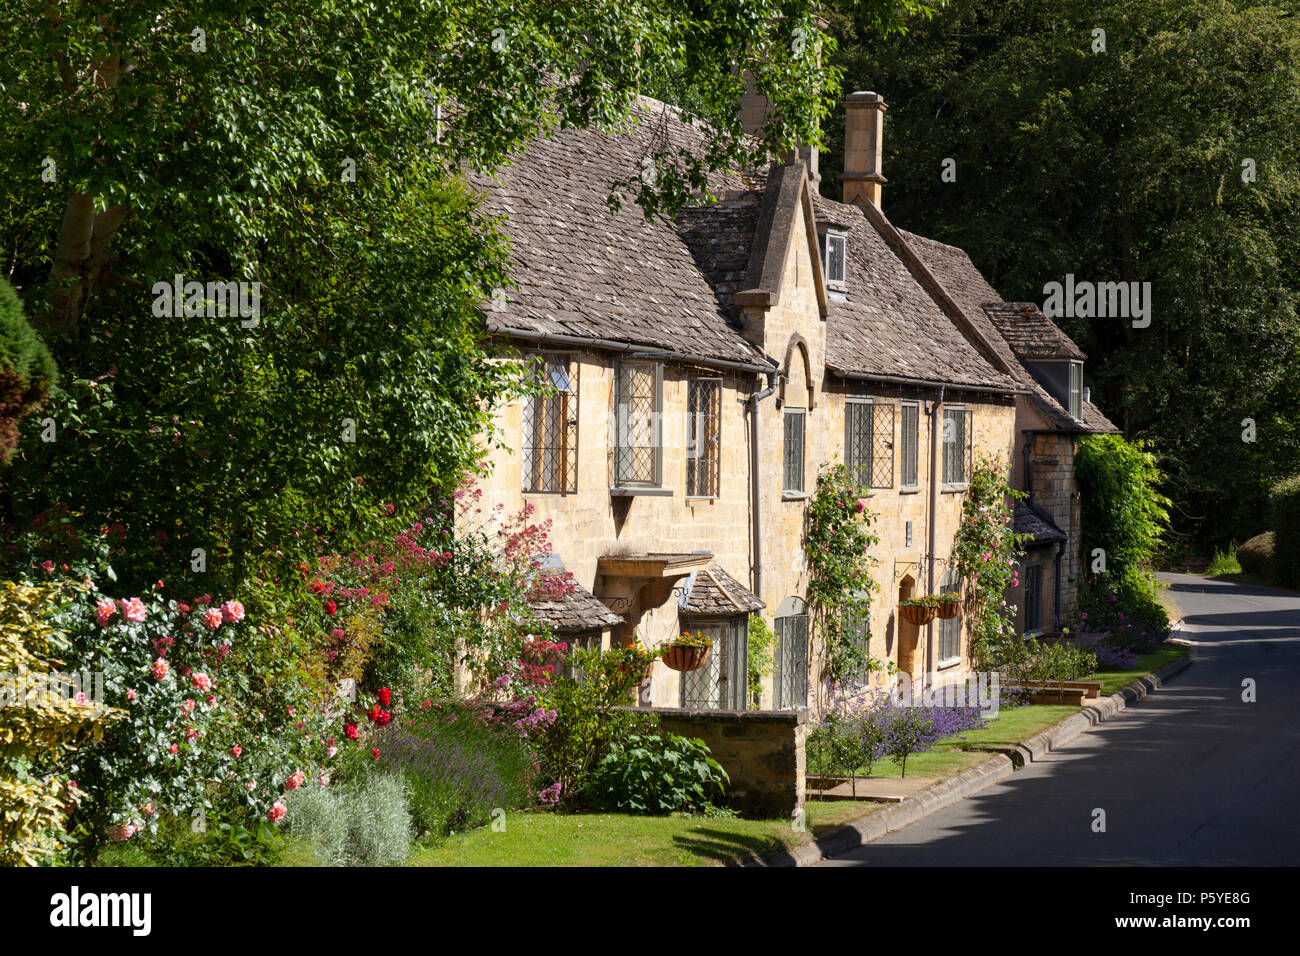 Line of Cotswold stone cottages covered in roses, Broad Campden, The Cotswolds, Gloucestershire, England, United Kingdom, Europe Stock Photo